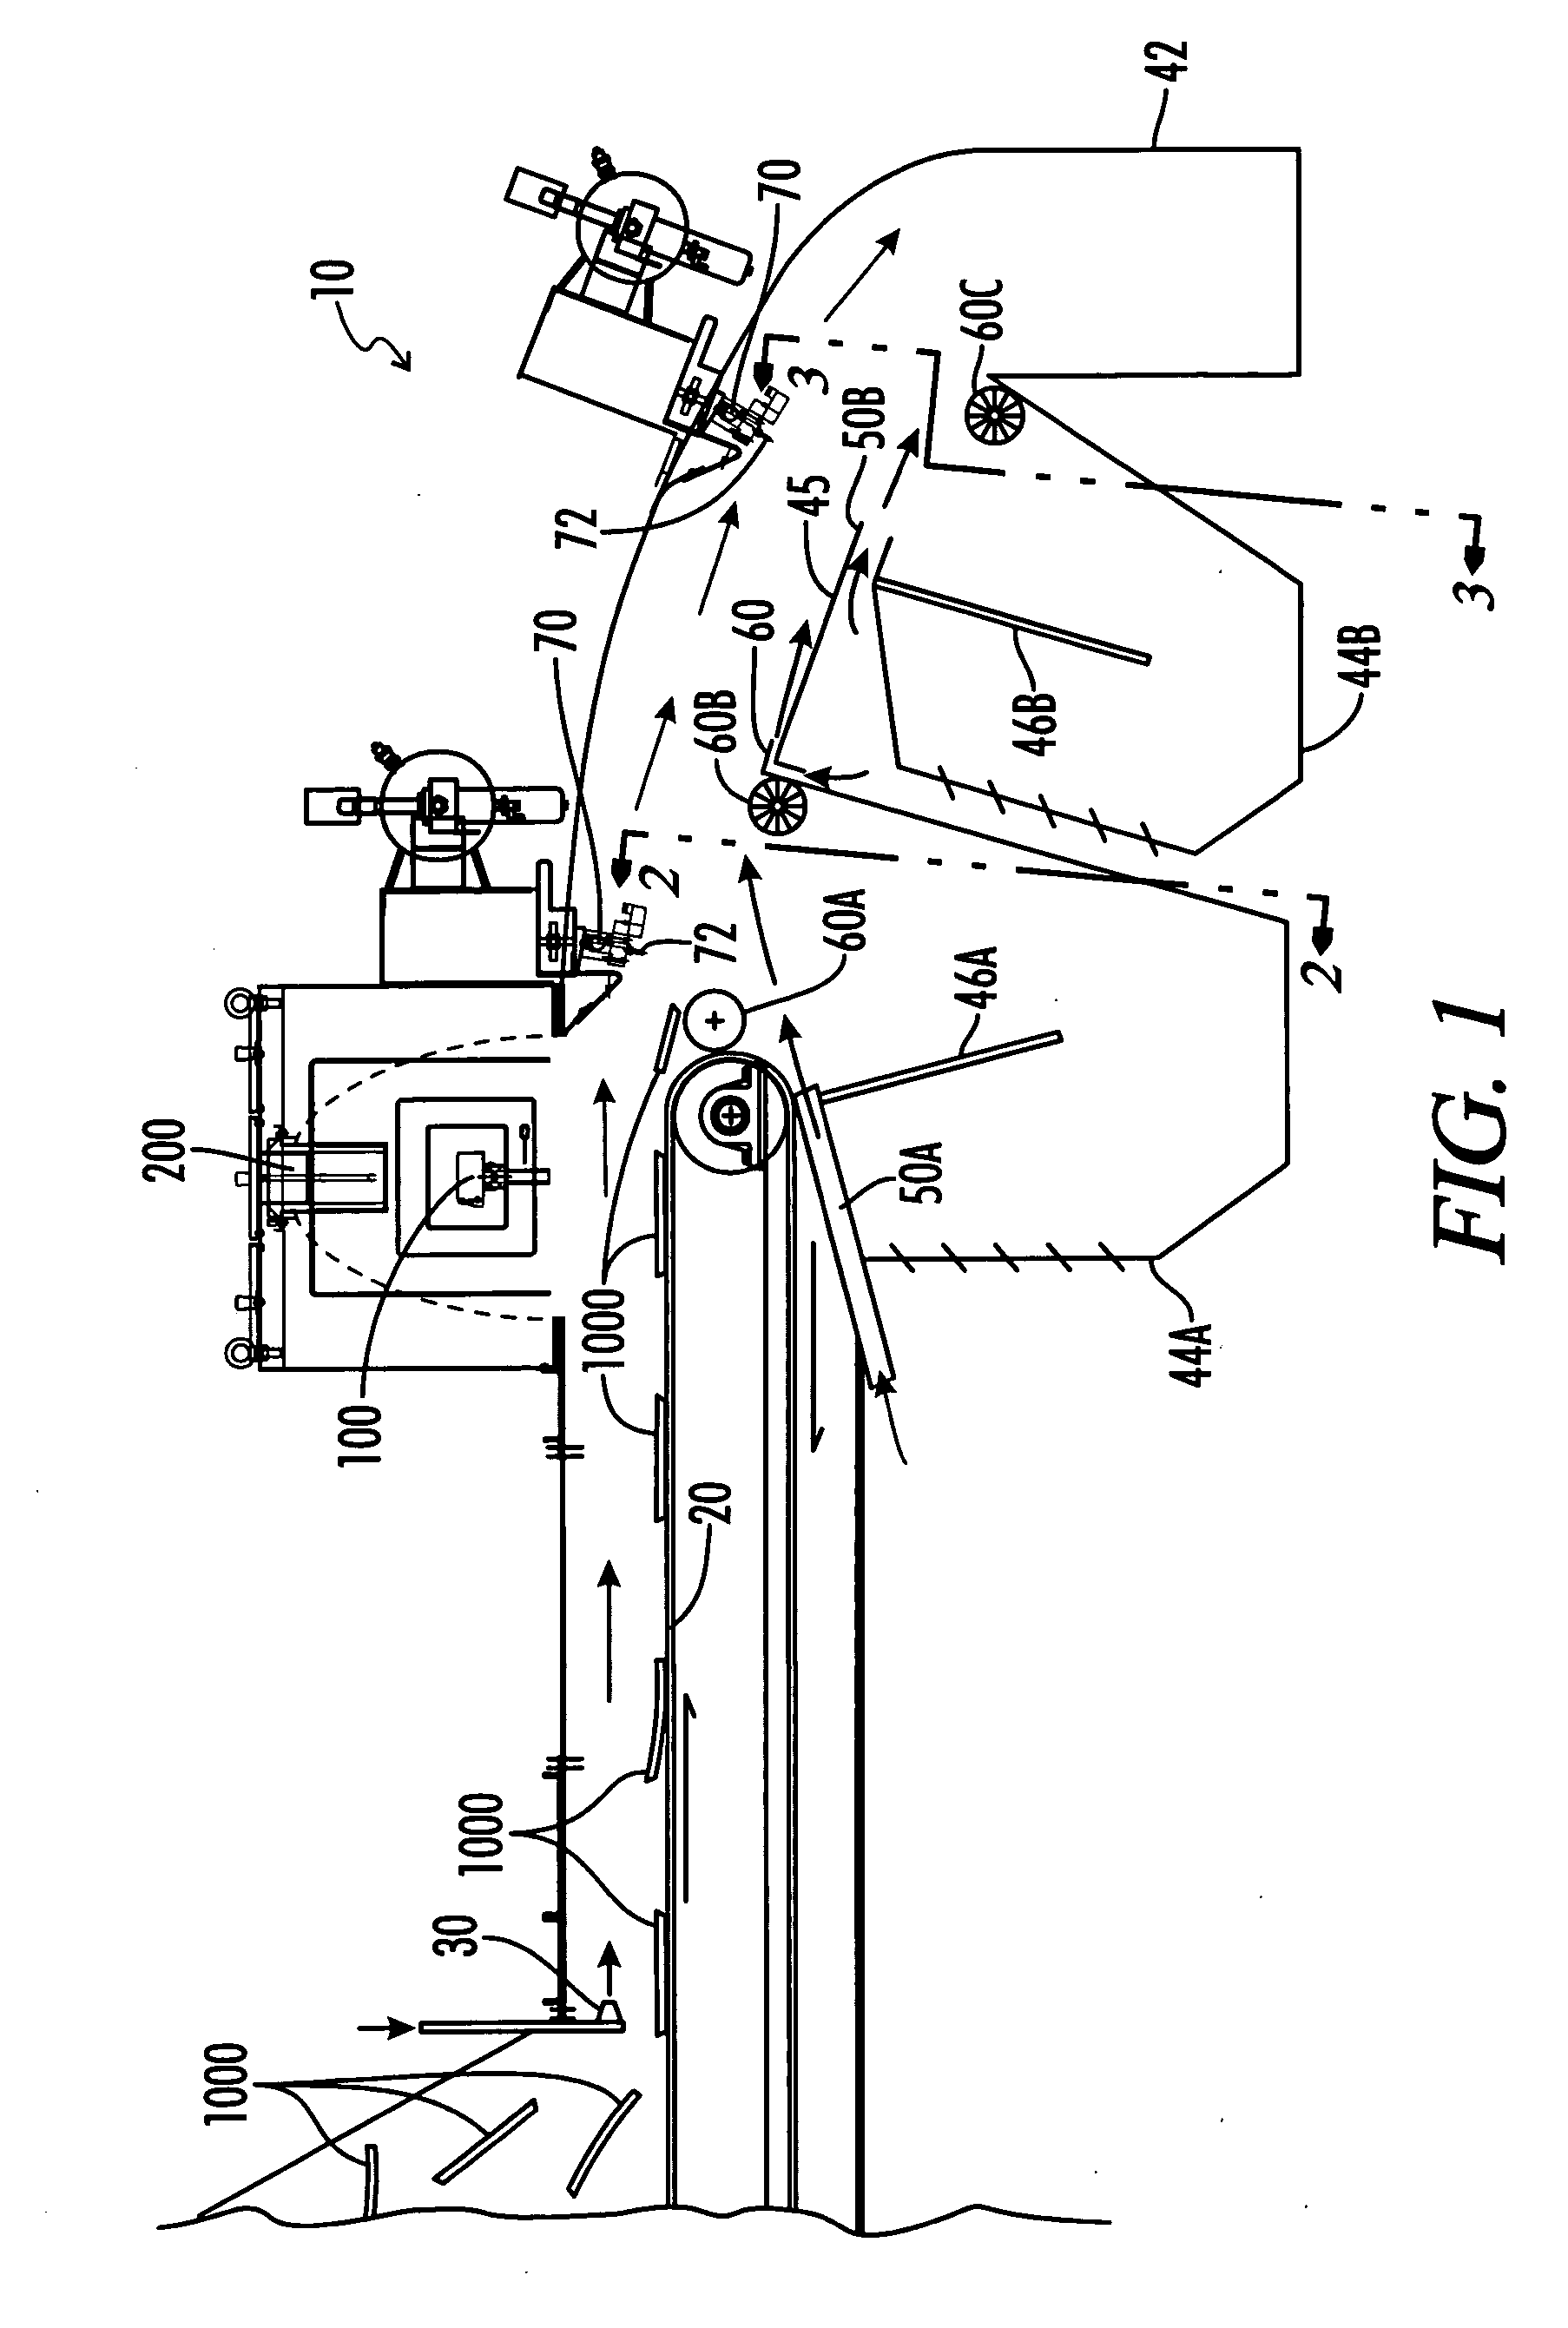 Sorting System Using Narrow-Band Electromagnetic Radiation